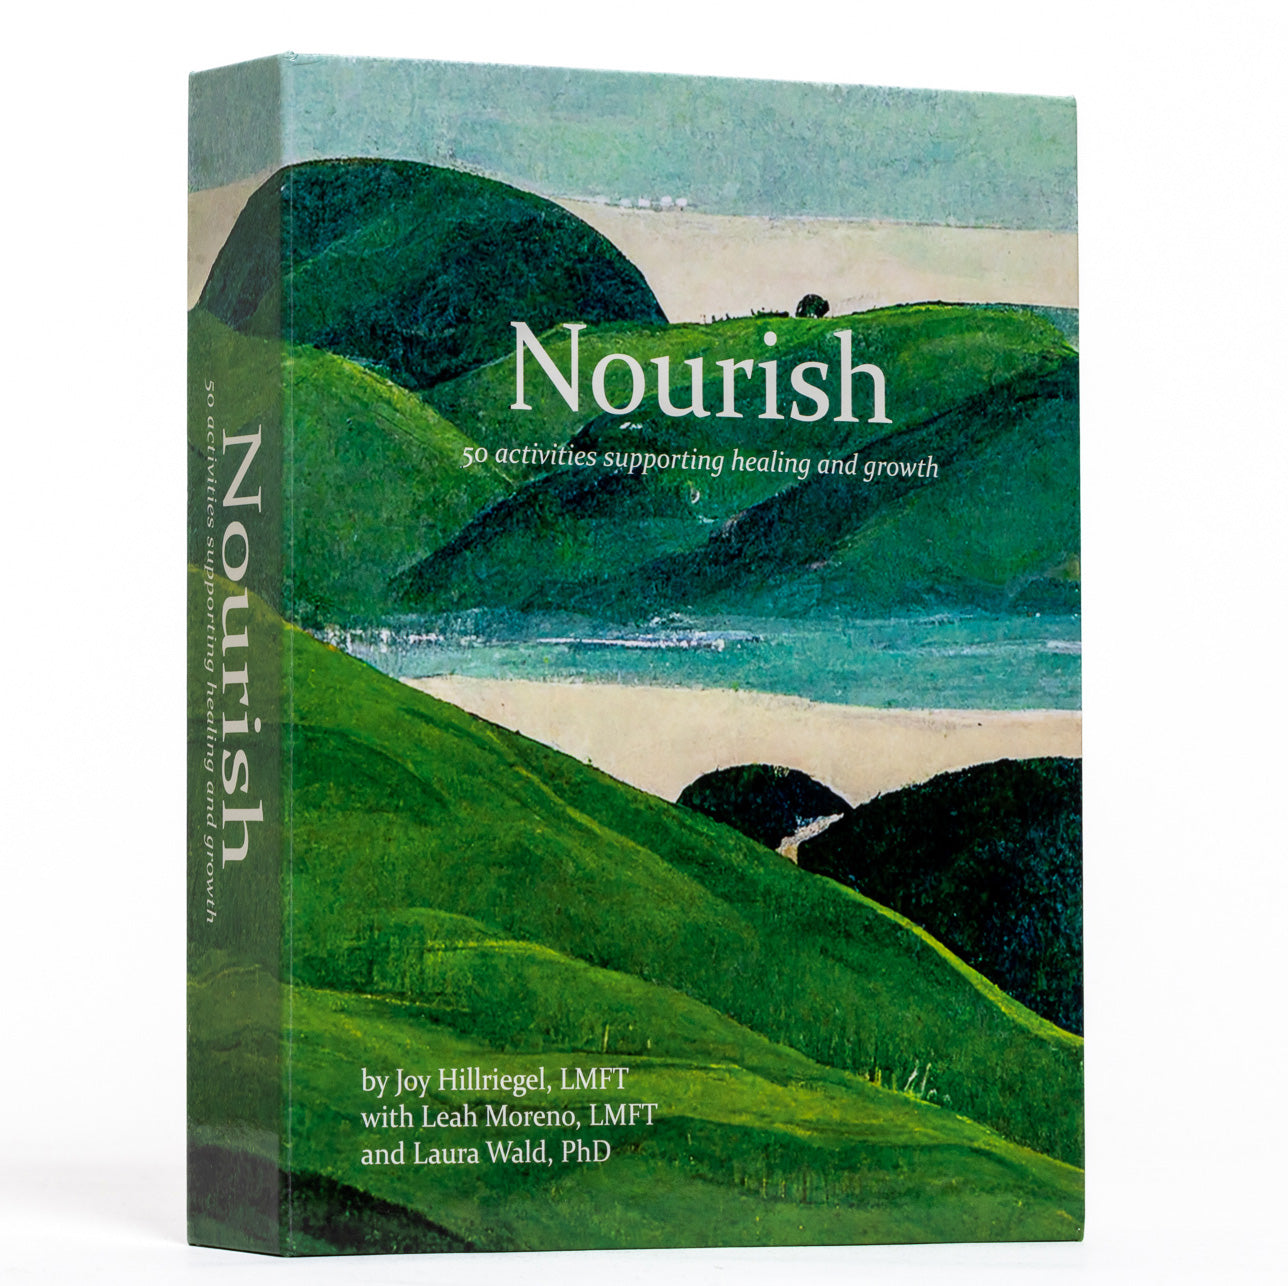 Nourish (complete set with gift box)